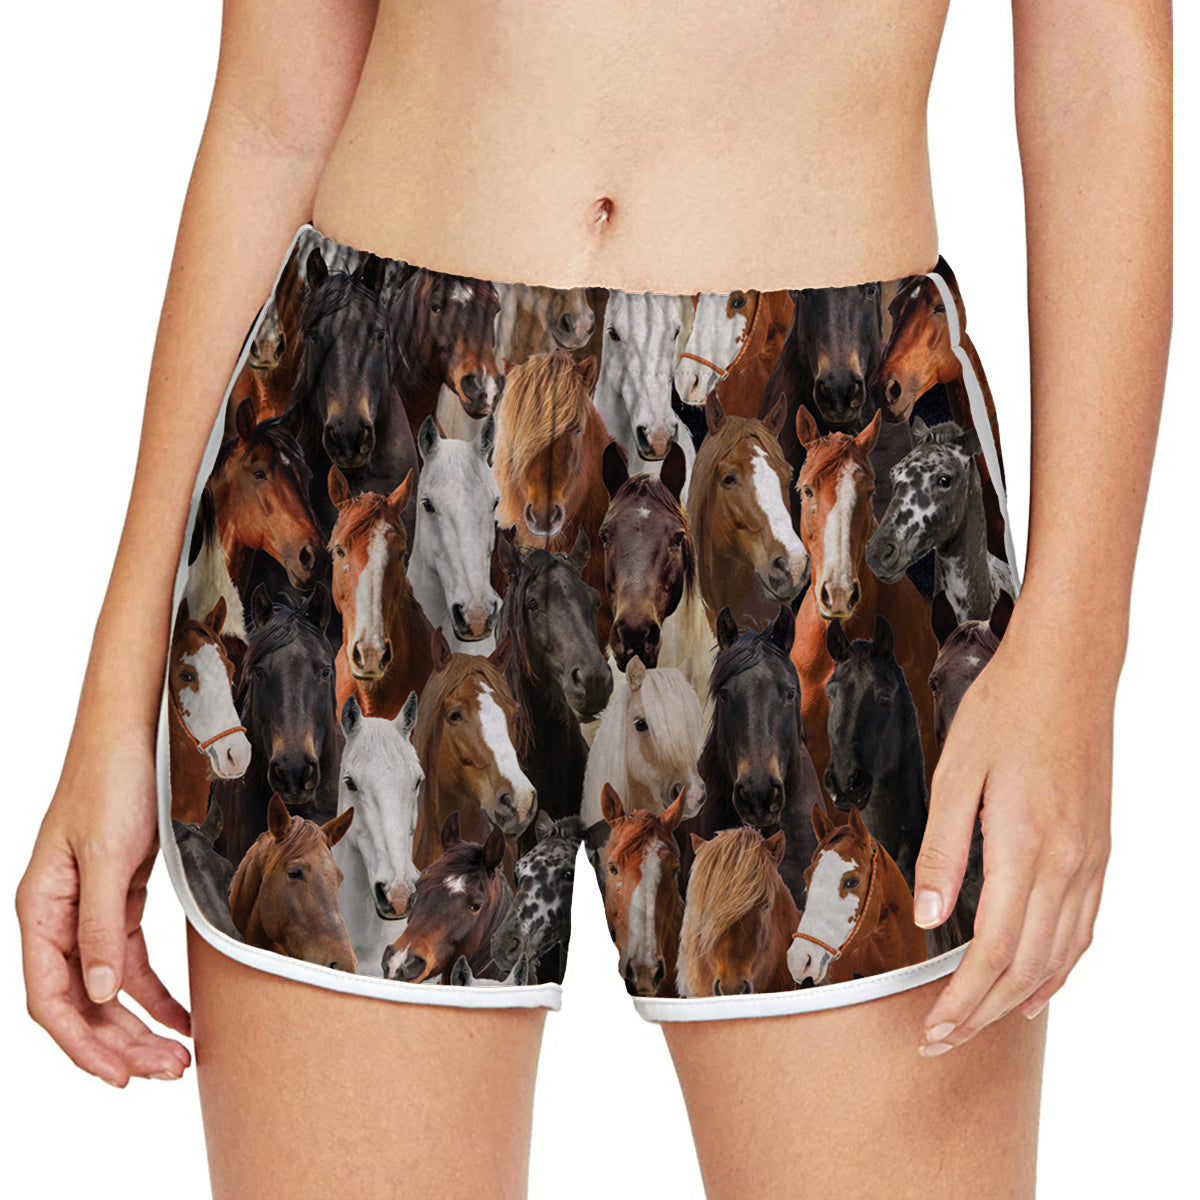 You Will Have A Bunch Of Horses - Women's Running Shorts V1